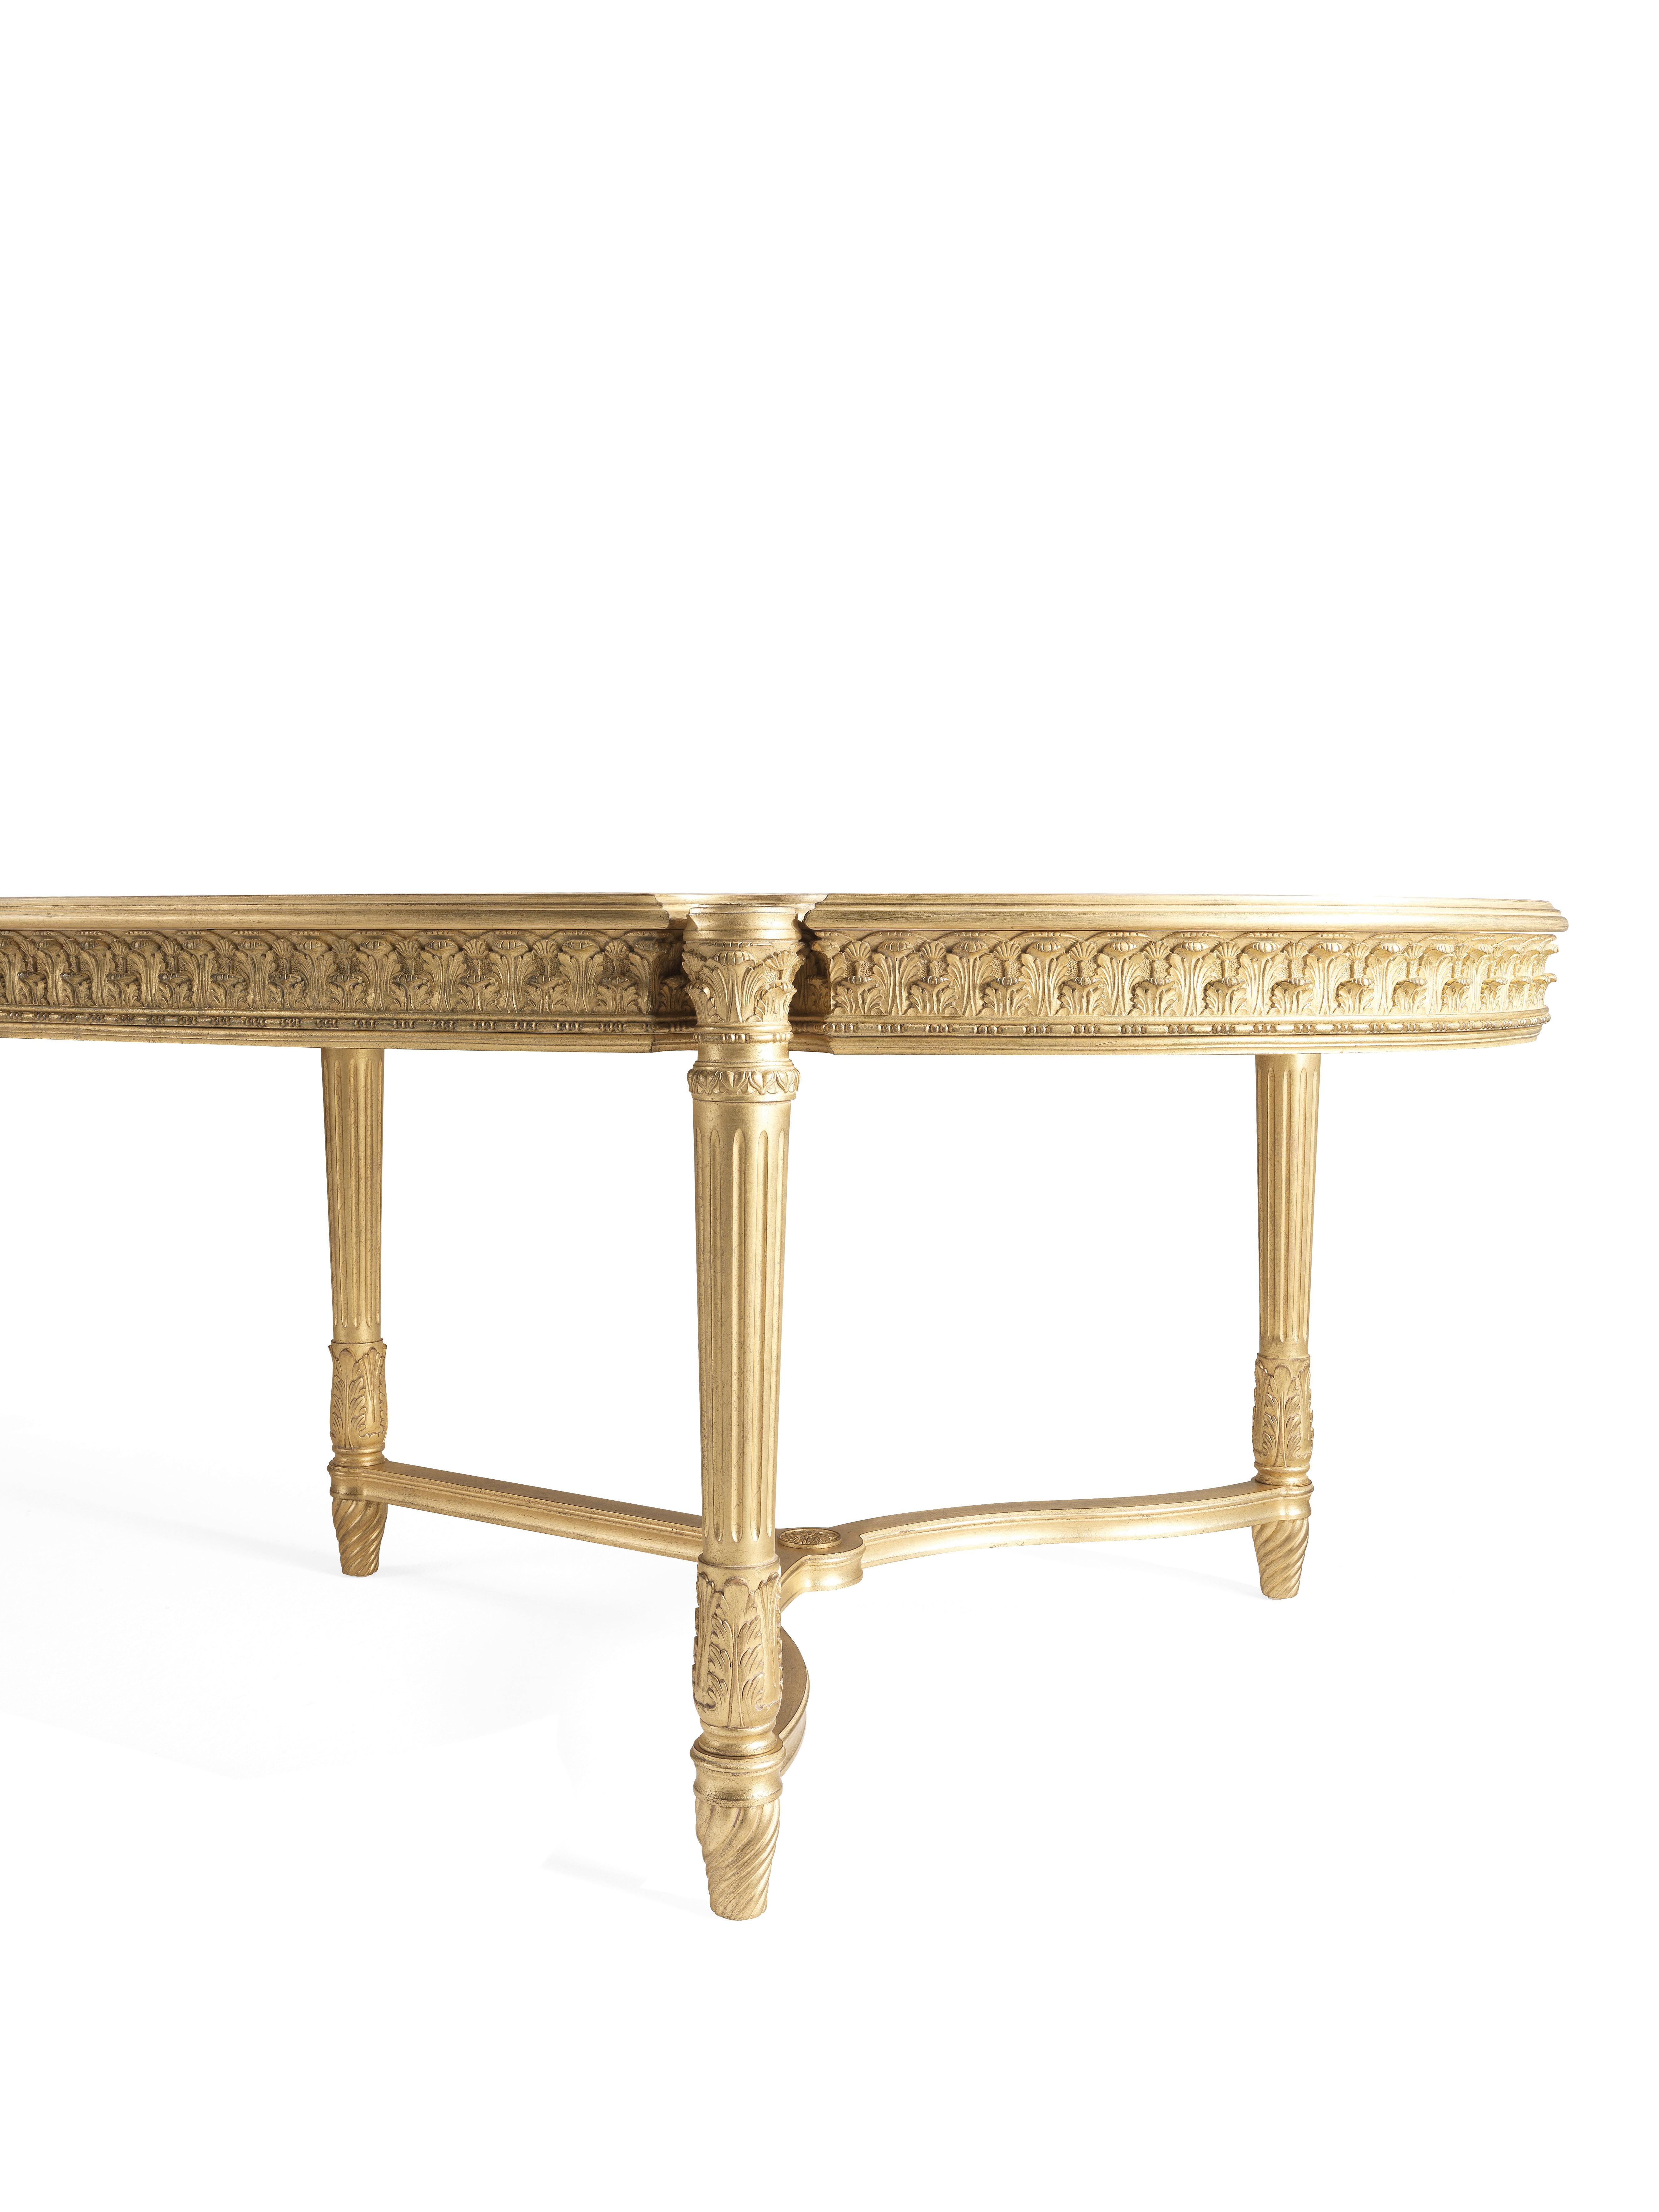 Italian 21st Century Boulevard Dining Table with Hand-carved Legs in style of Louis XVI For Sale